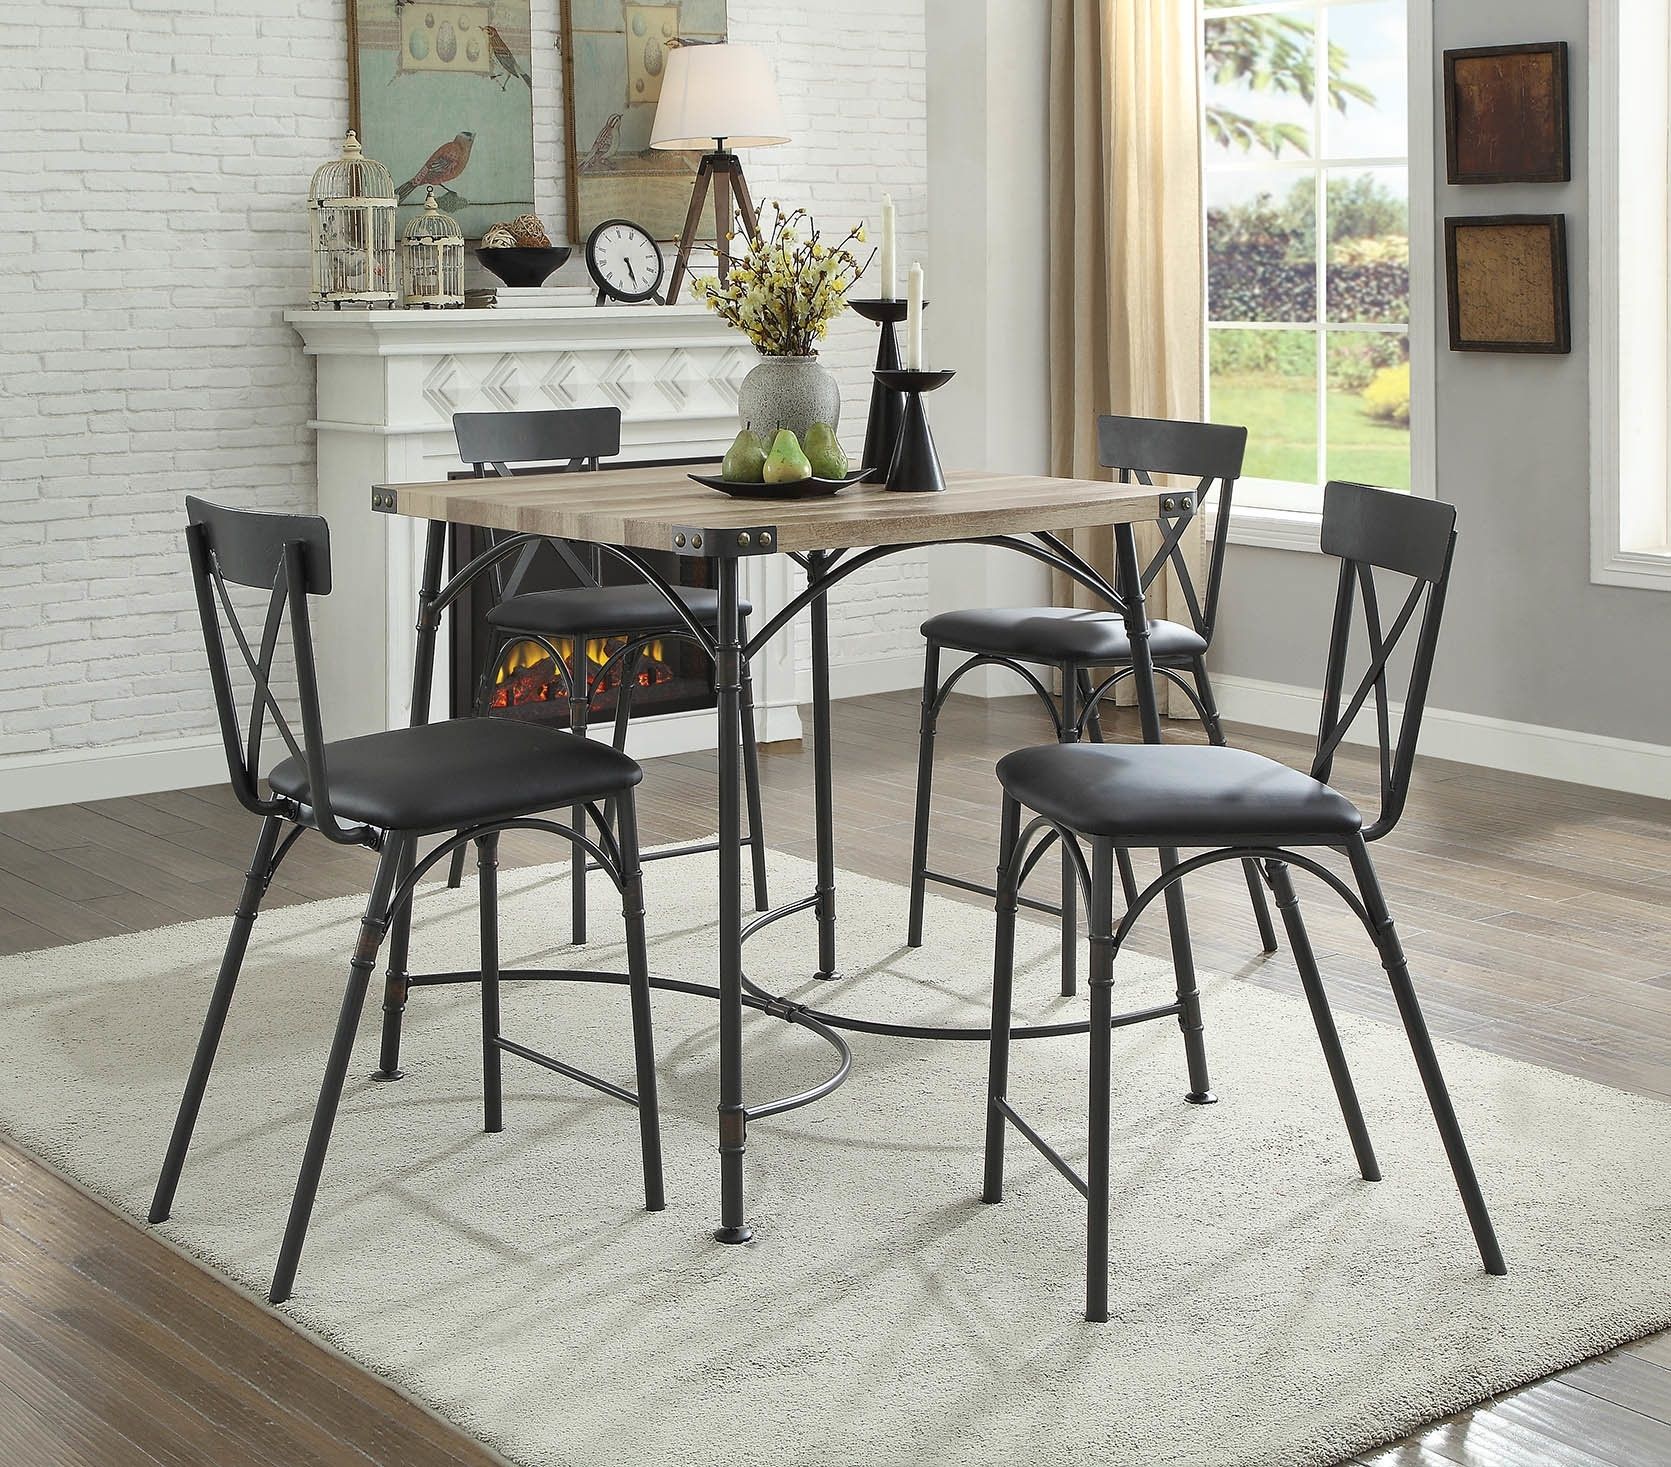 17 Stories Christofor Counter Height 5 Piece Dining Set | Wayfair In Most Popular Caira Black 5 Piece Round Dining Sets With Upholstered Side Chairs (View 5 of 20)